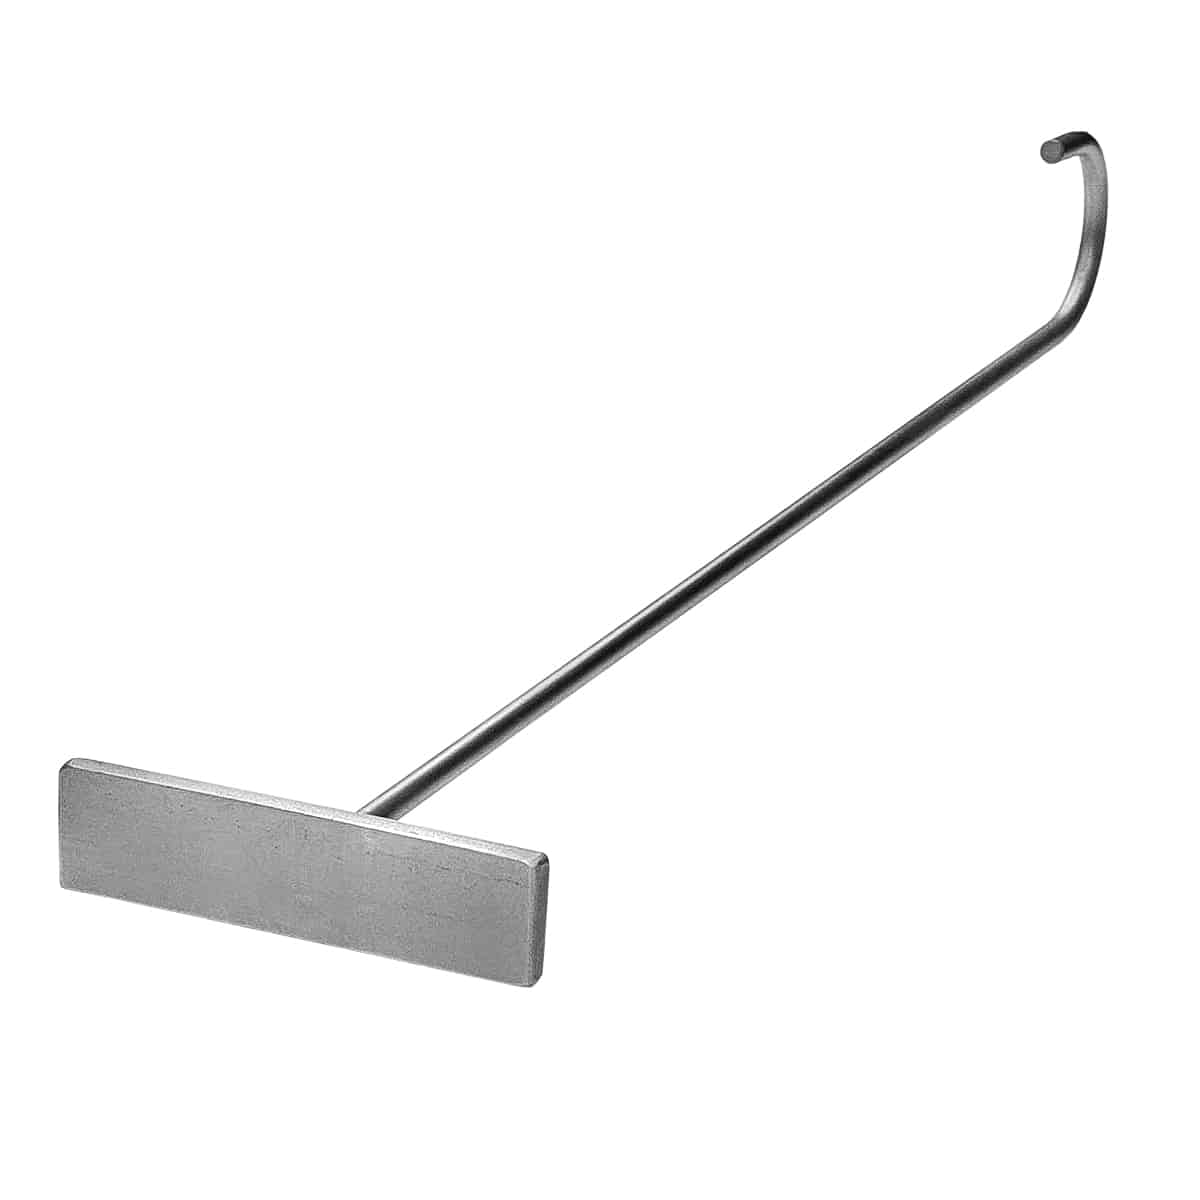 Goldens' Cast Iron Ash removal Combo tool is perfect for use on our kamados and fire pits. Produced out of high-quality steel and made in USA!